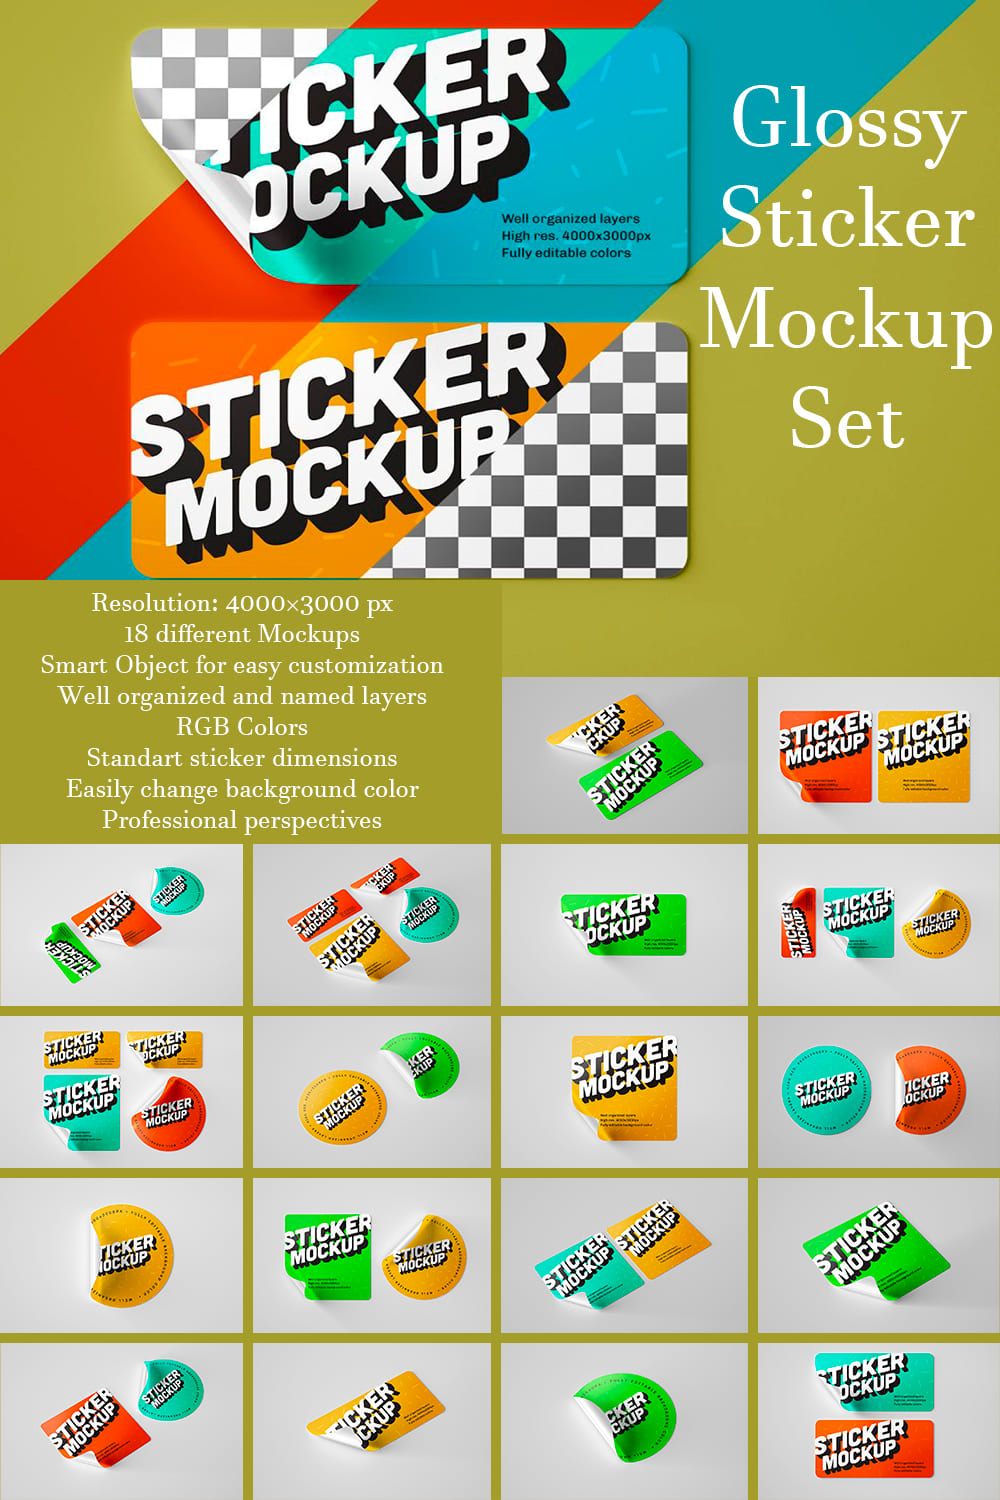 Set of images of adorable glossy stickers.